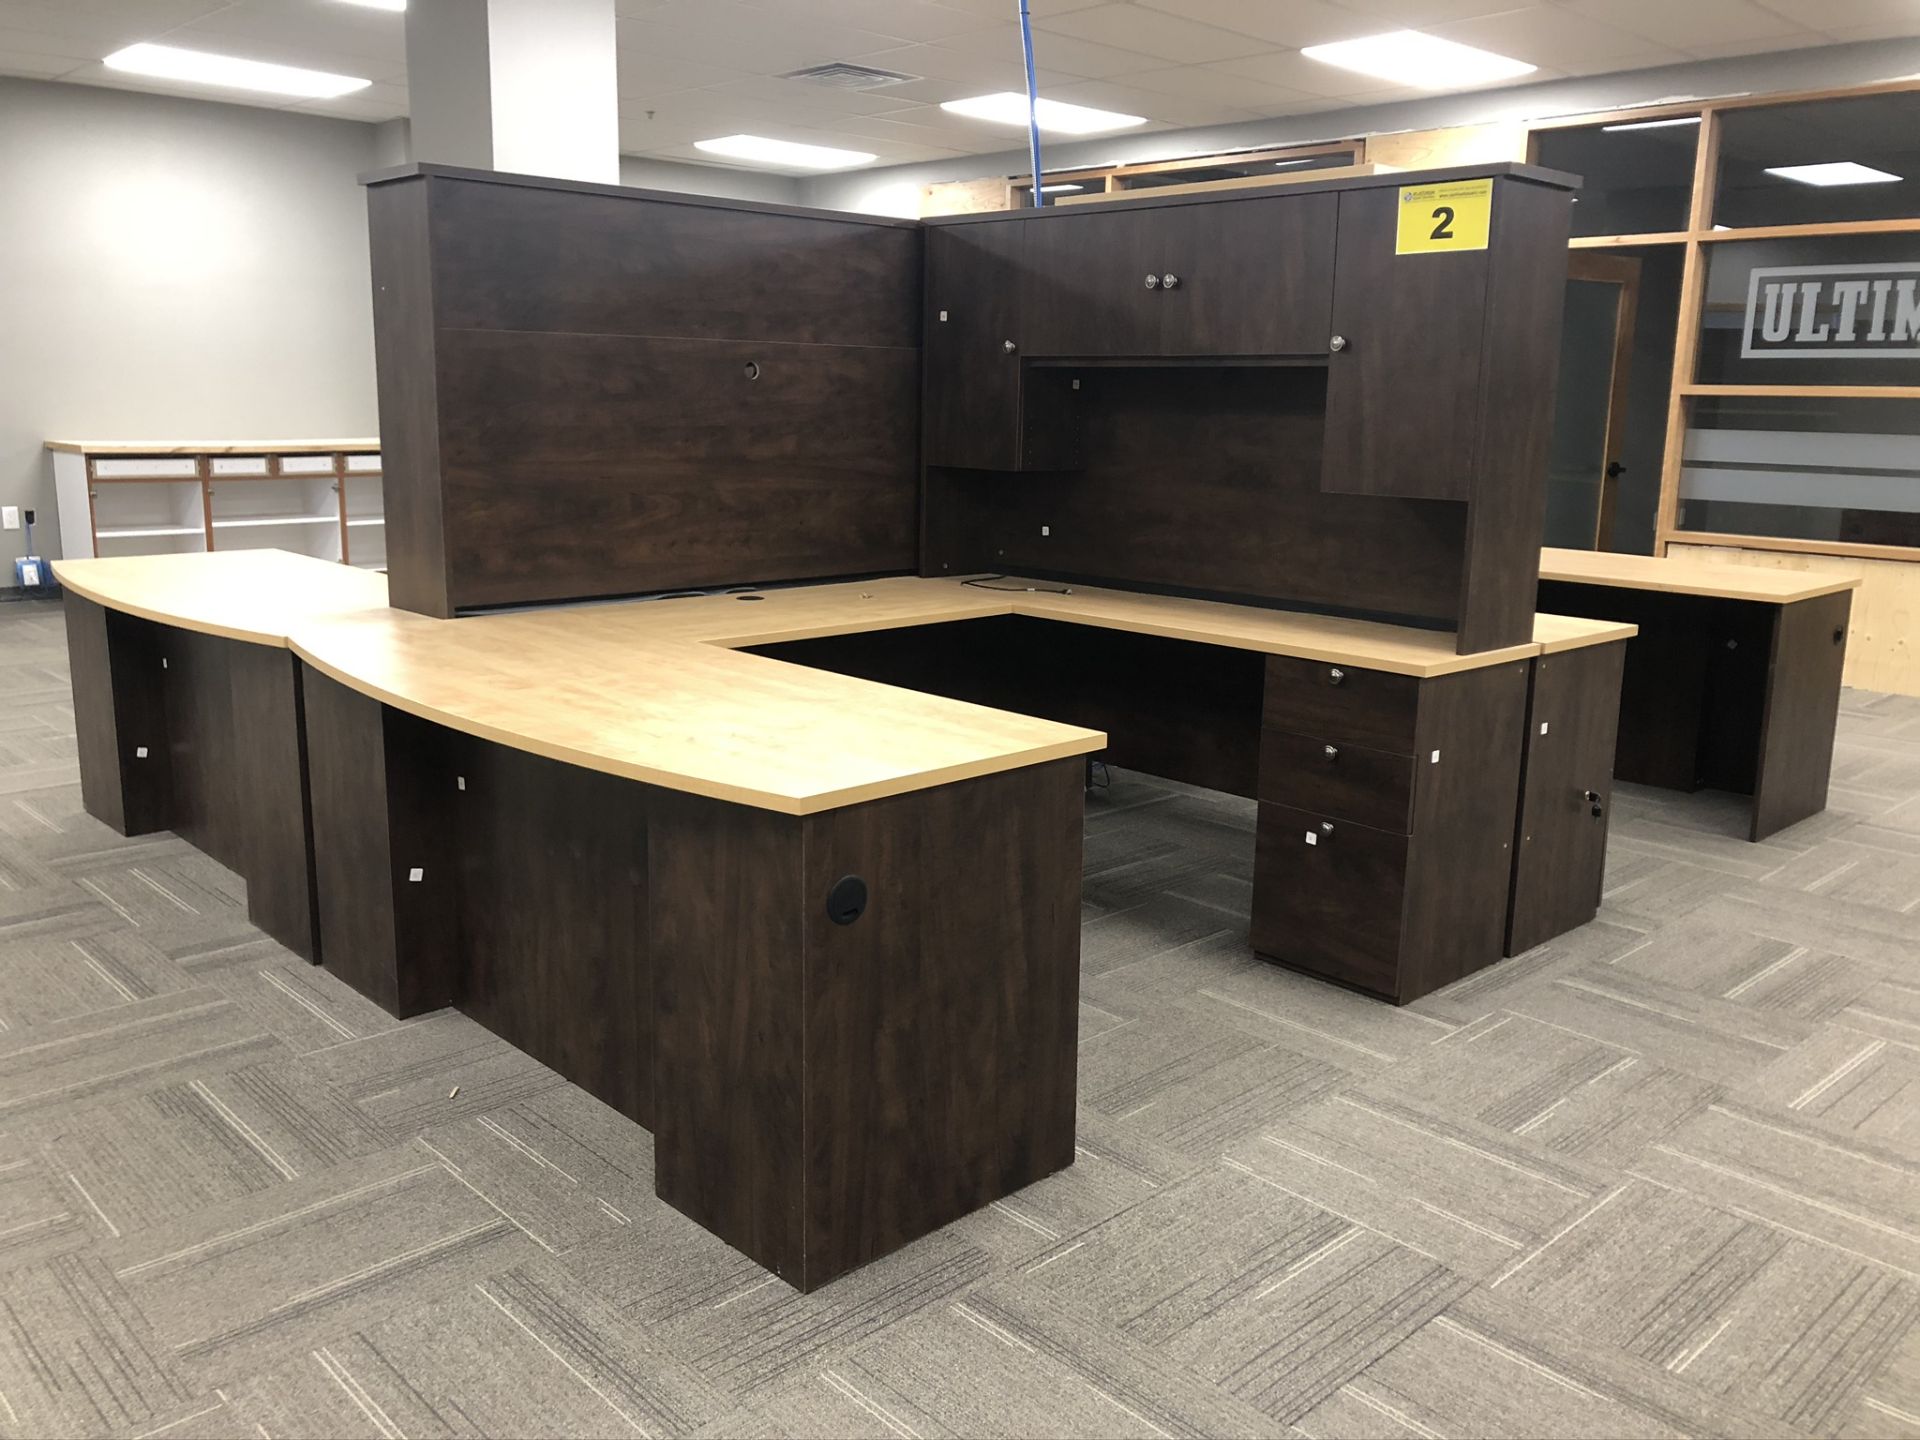 BROWN, U-SHAPED, OFFICE DESK WITH HUTCH, 7' X 6'